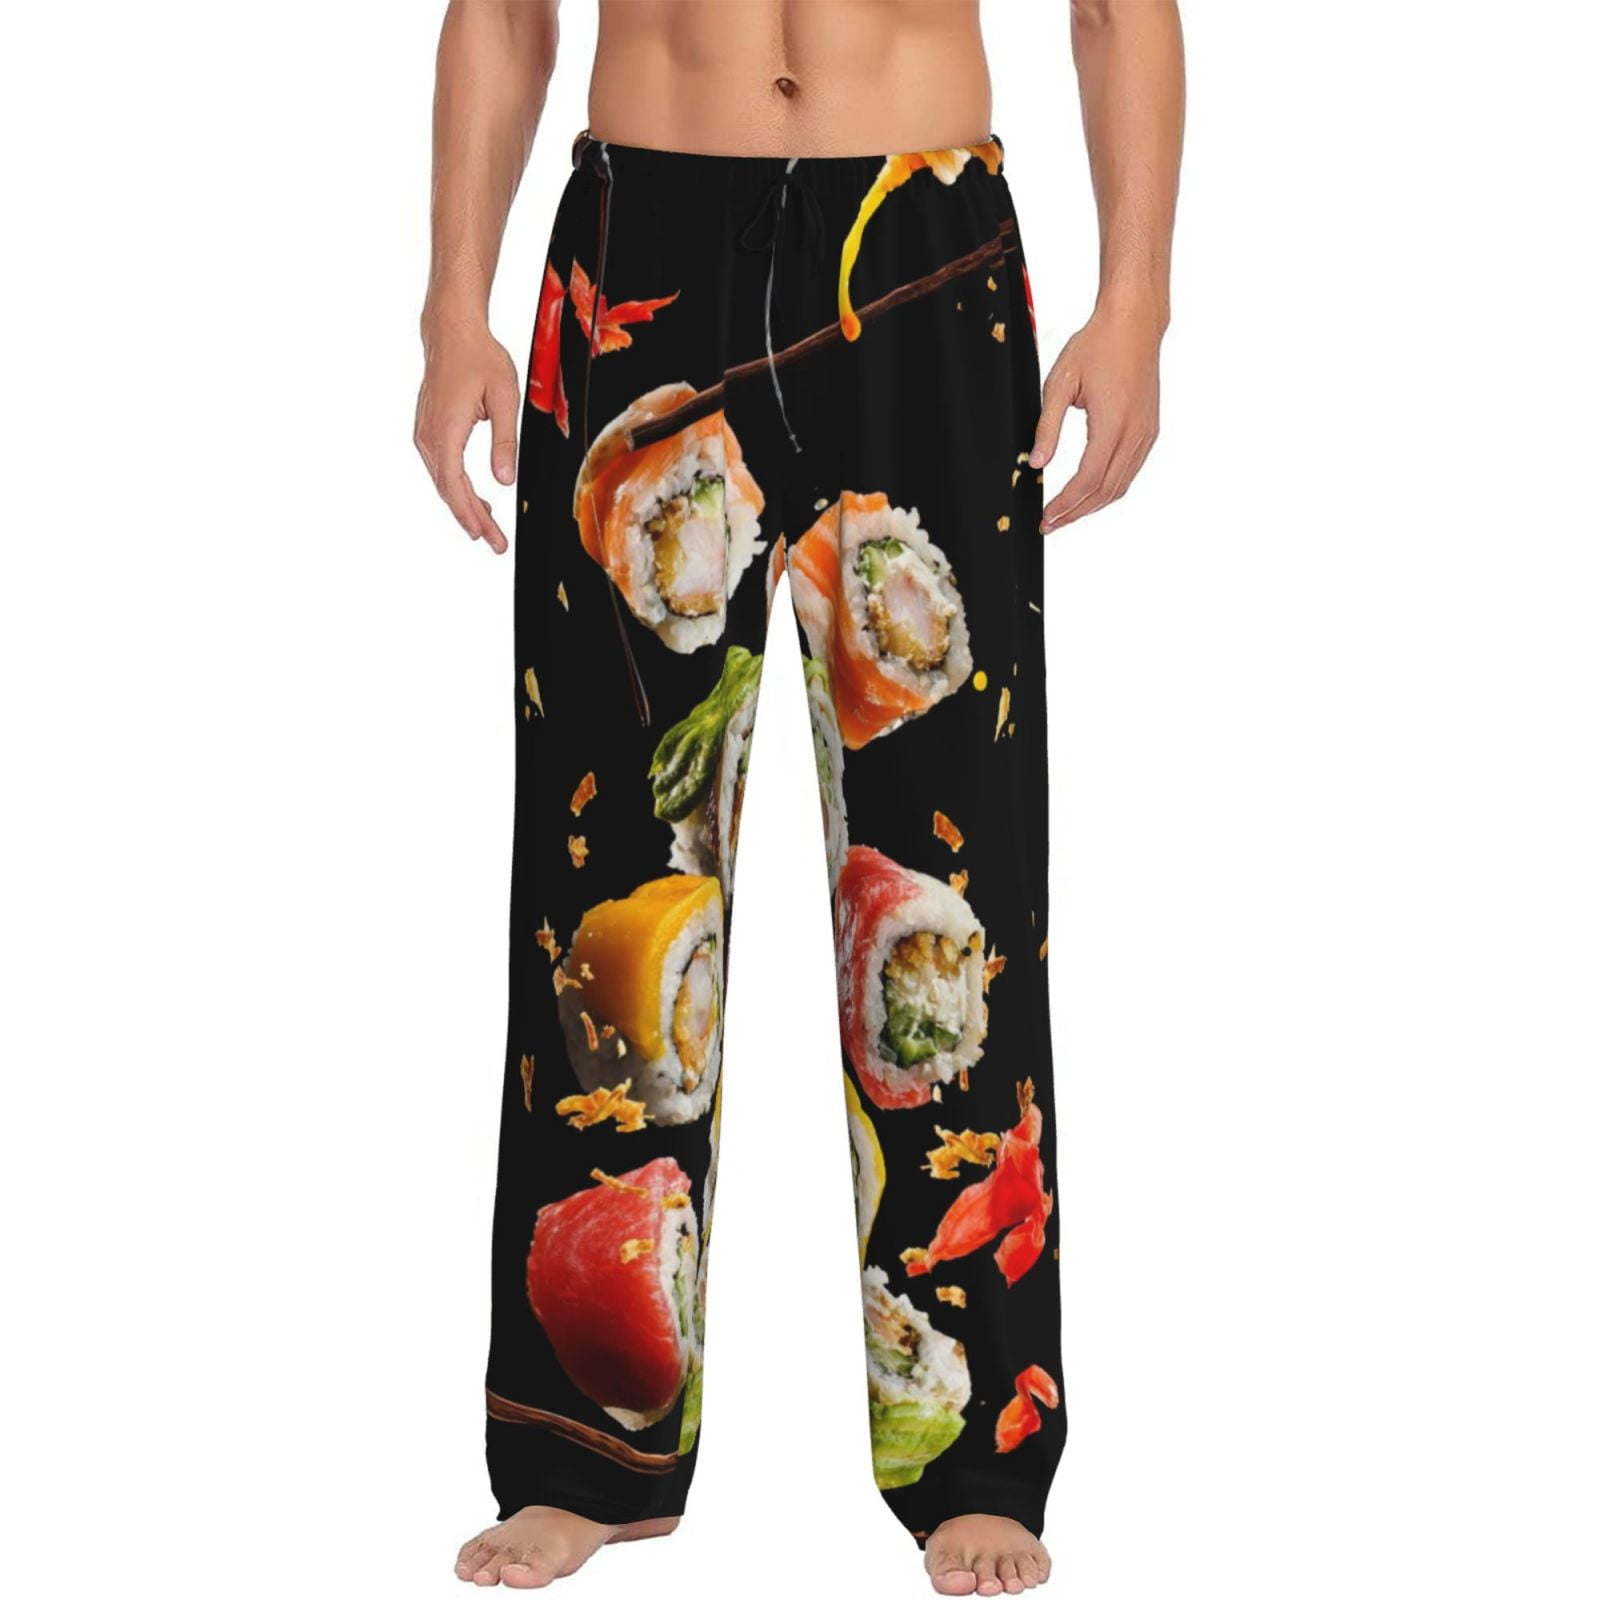 Super Soft Assorted Prints And Colors Lounge Pants 6 Pack (S-M-L- XL) –  MeetPrice